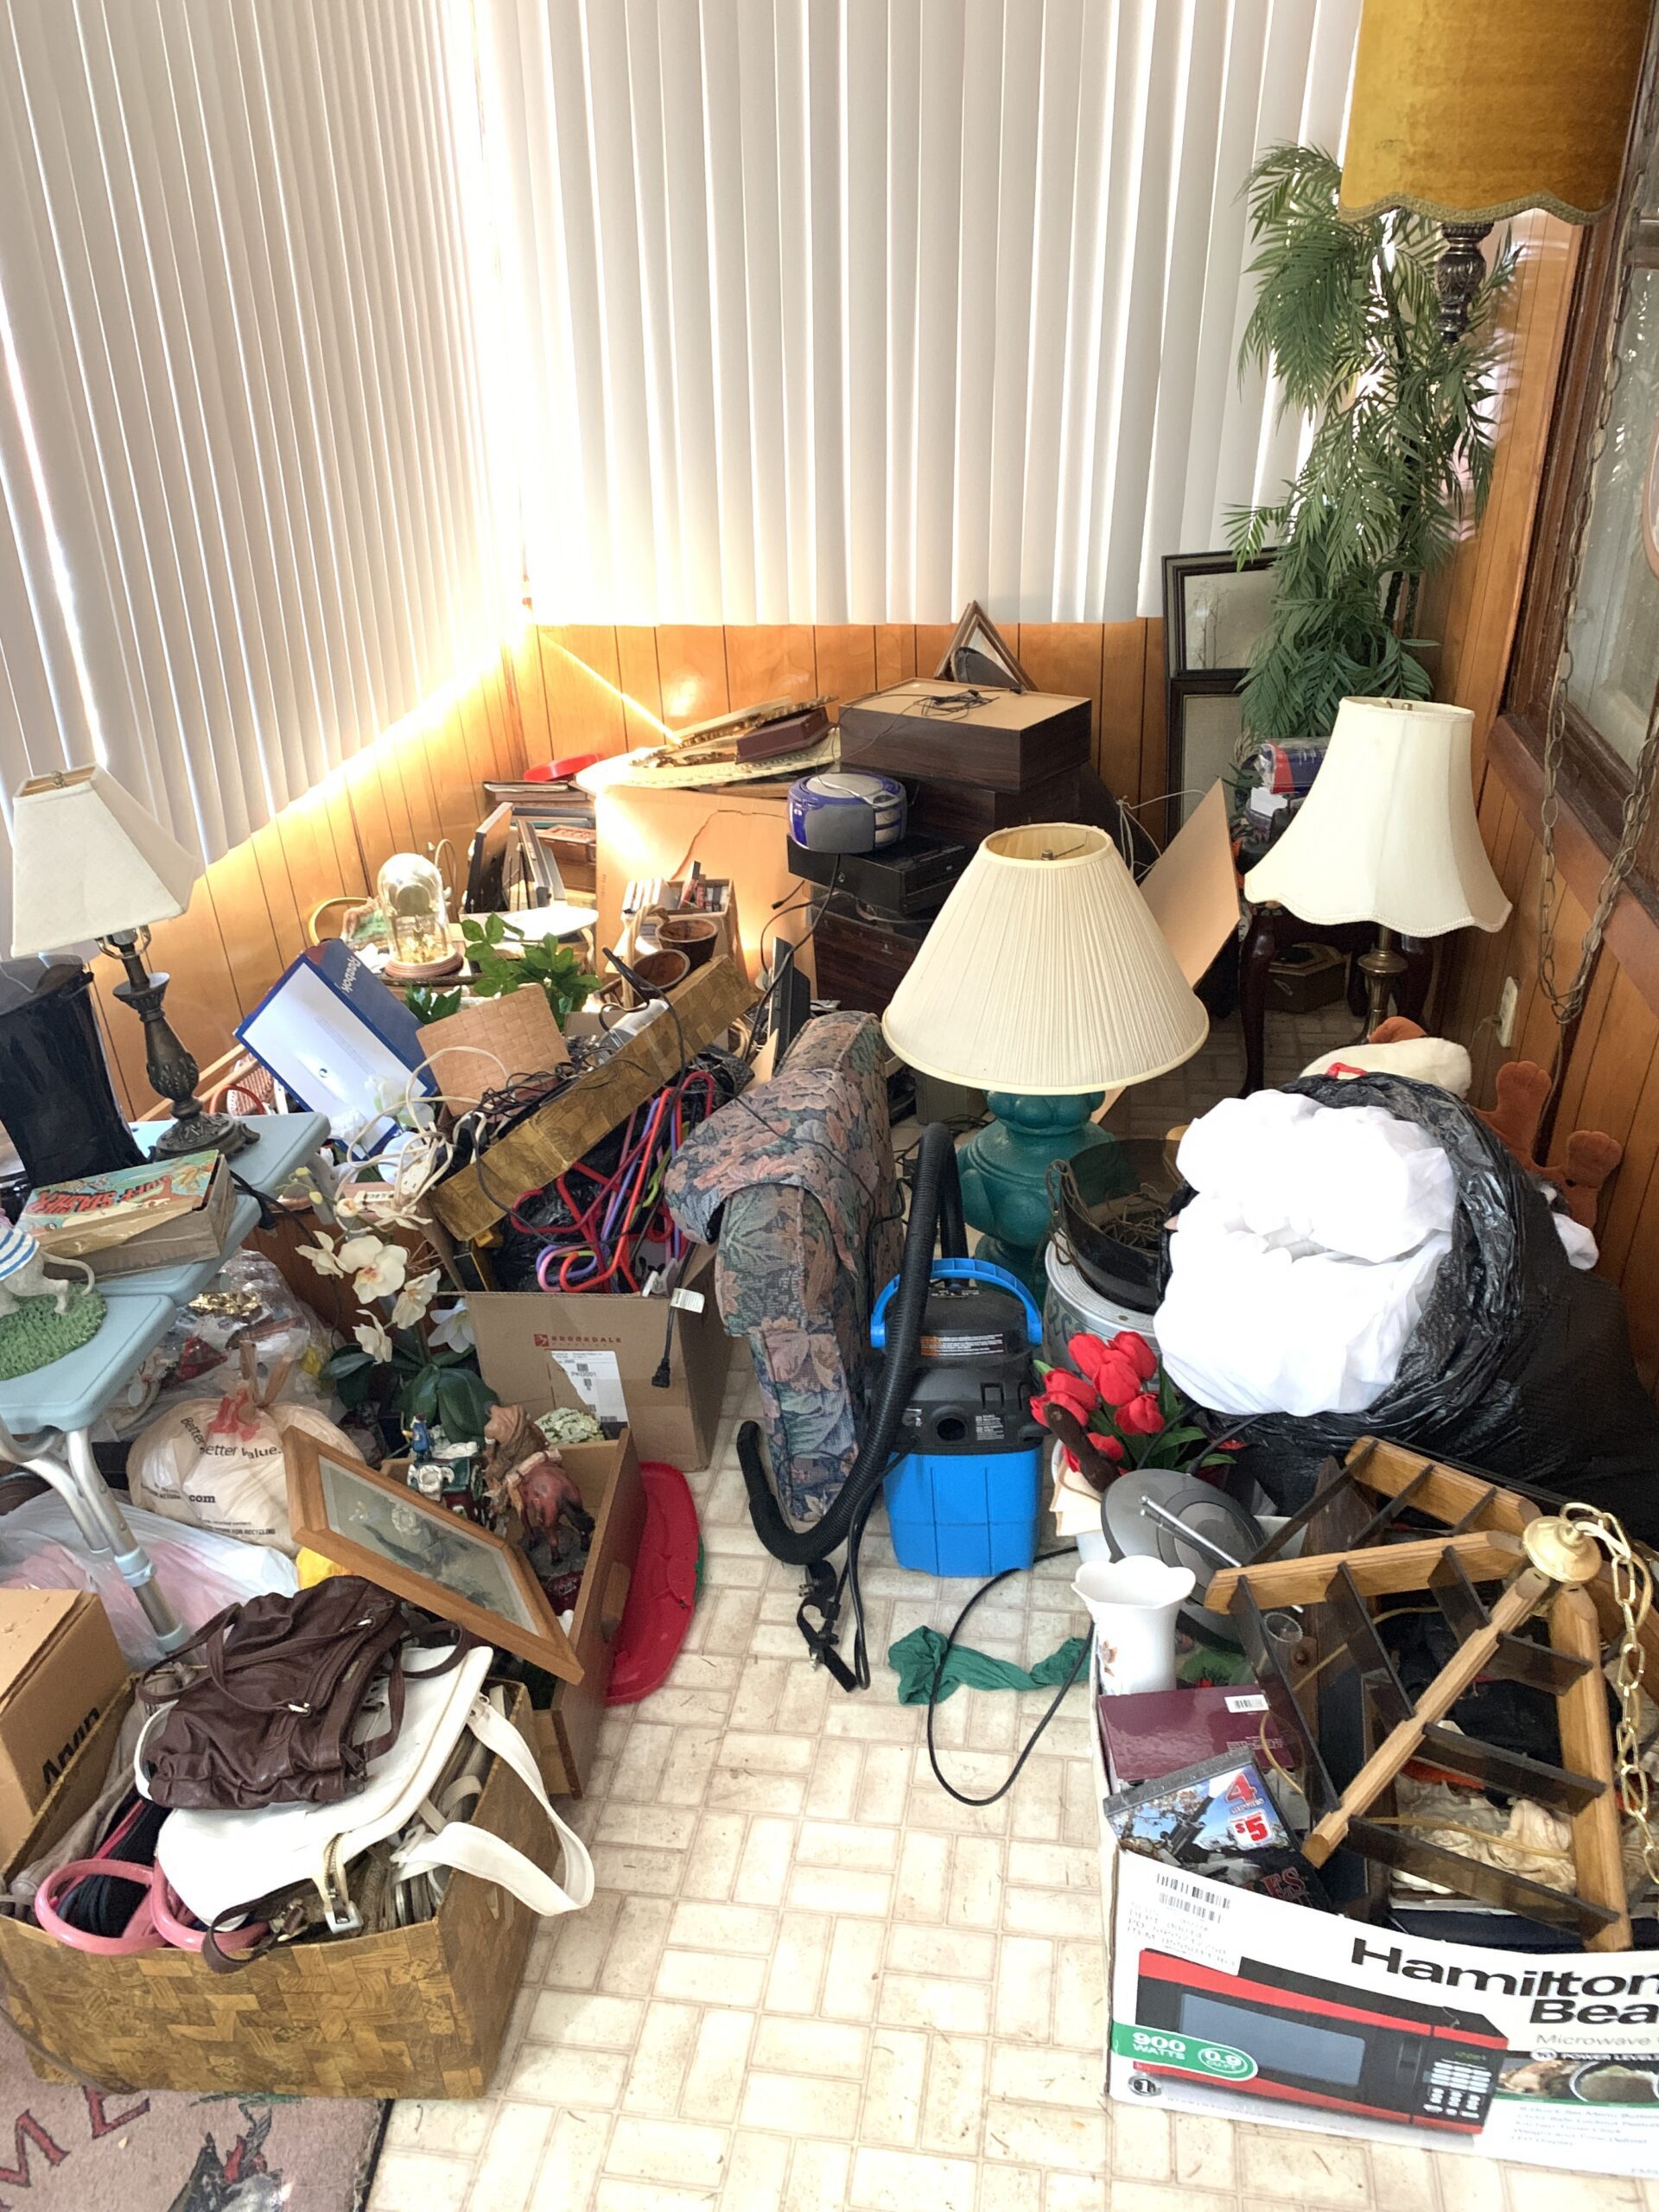 A cluttered space in need of a home cleanout service